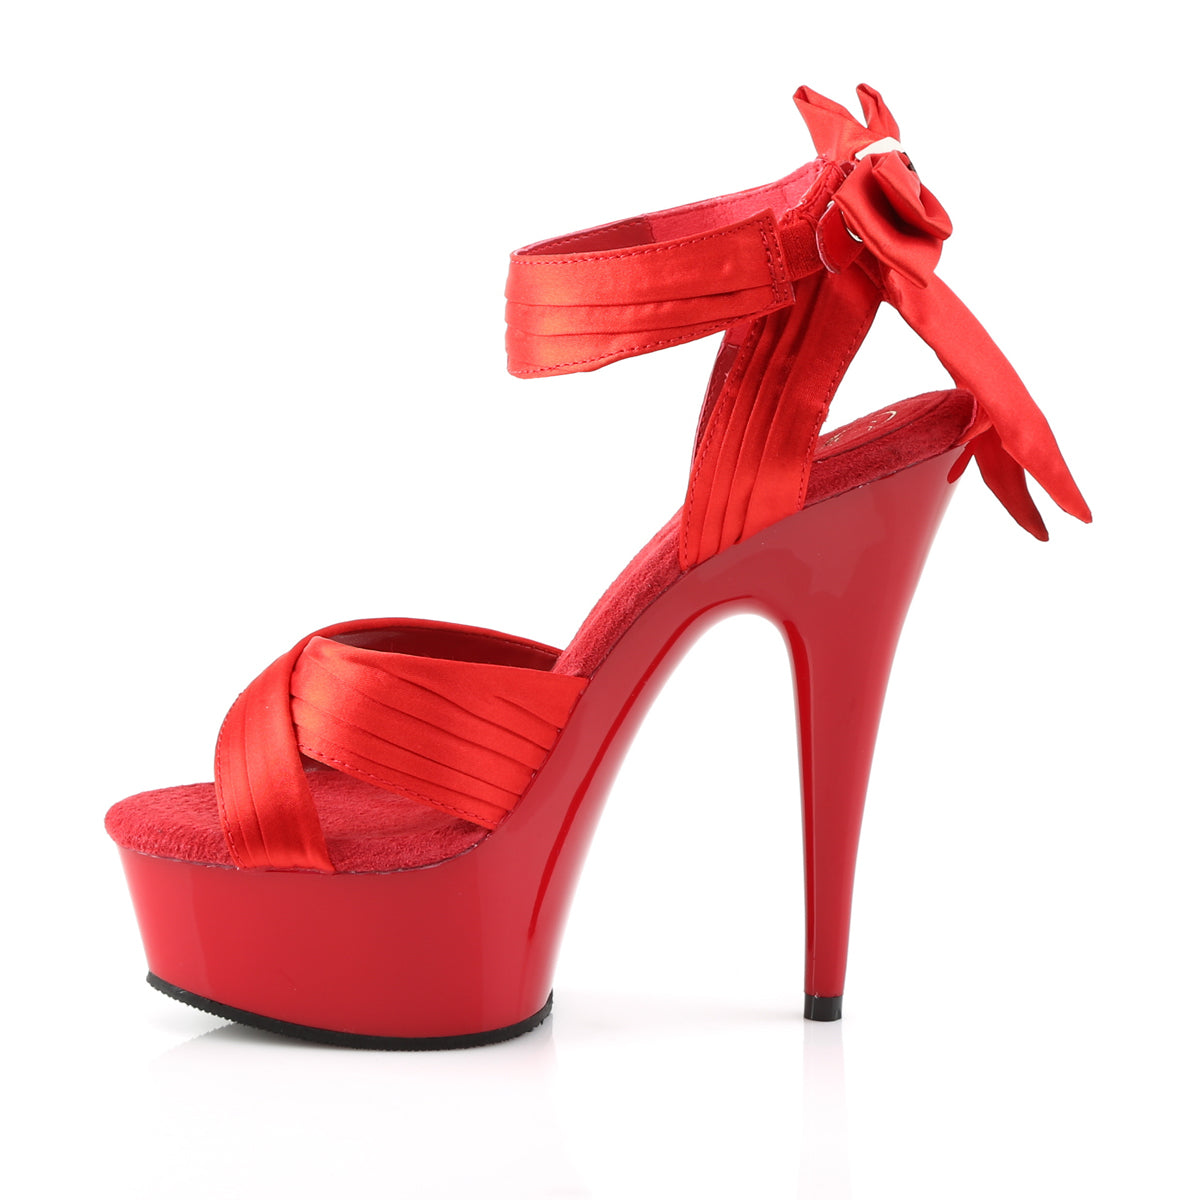 DELIGHT-668 Red Satin/Red